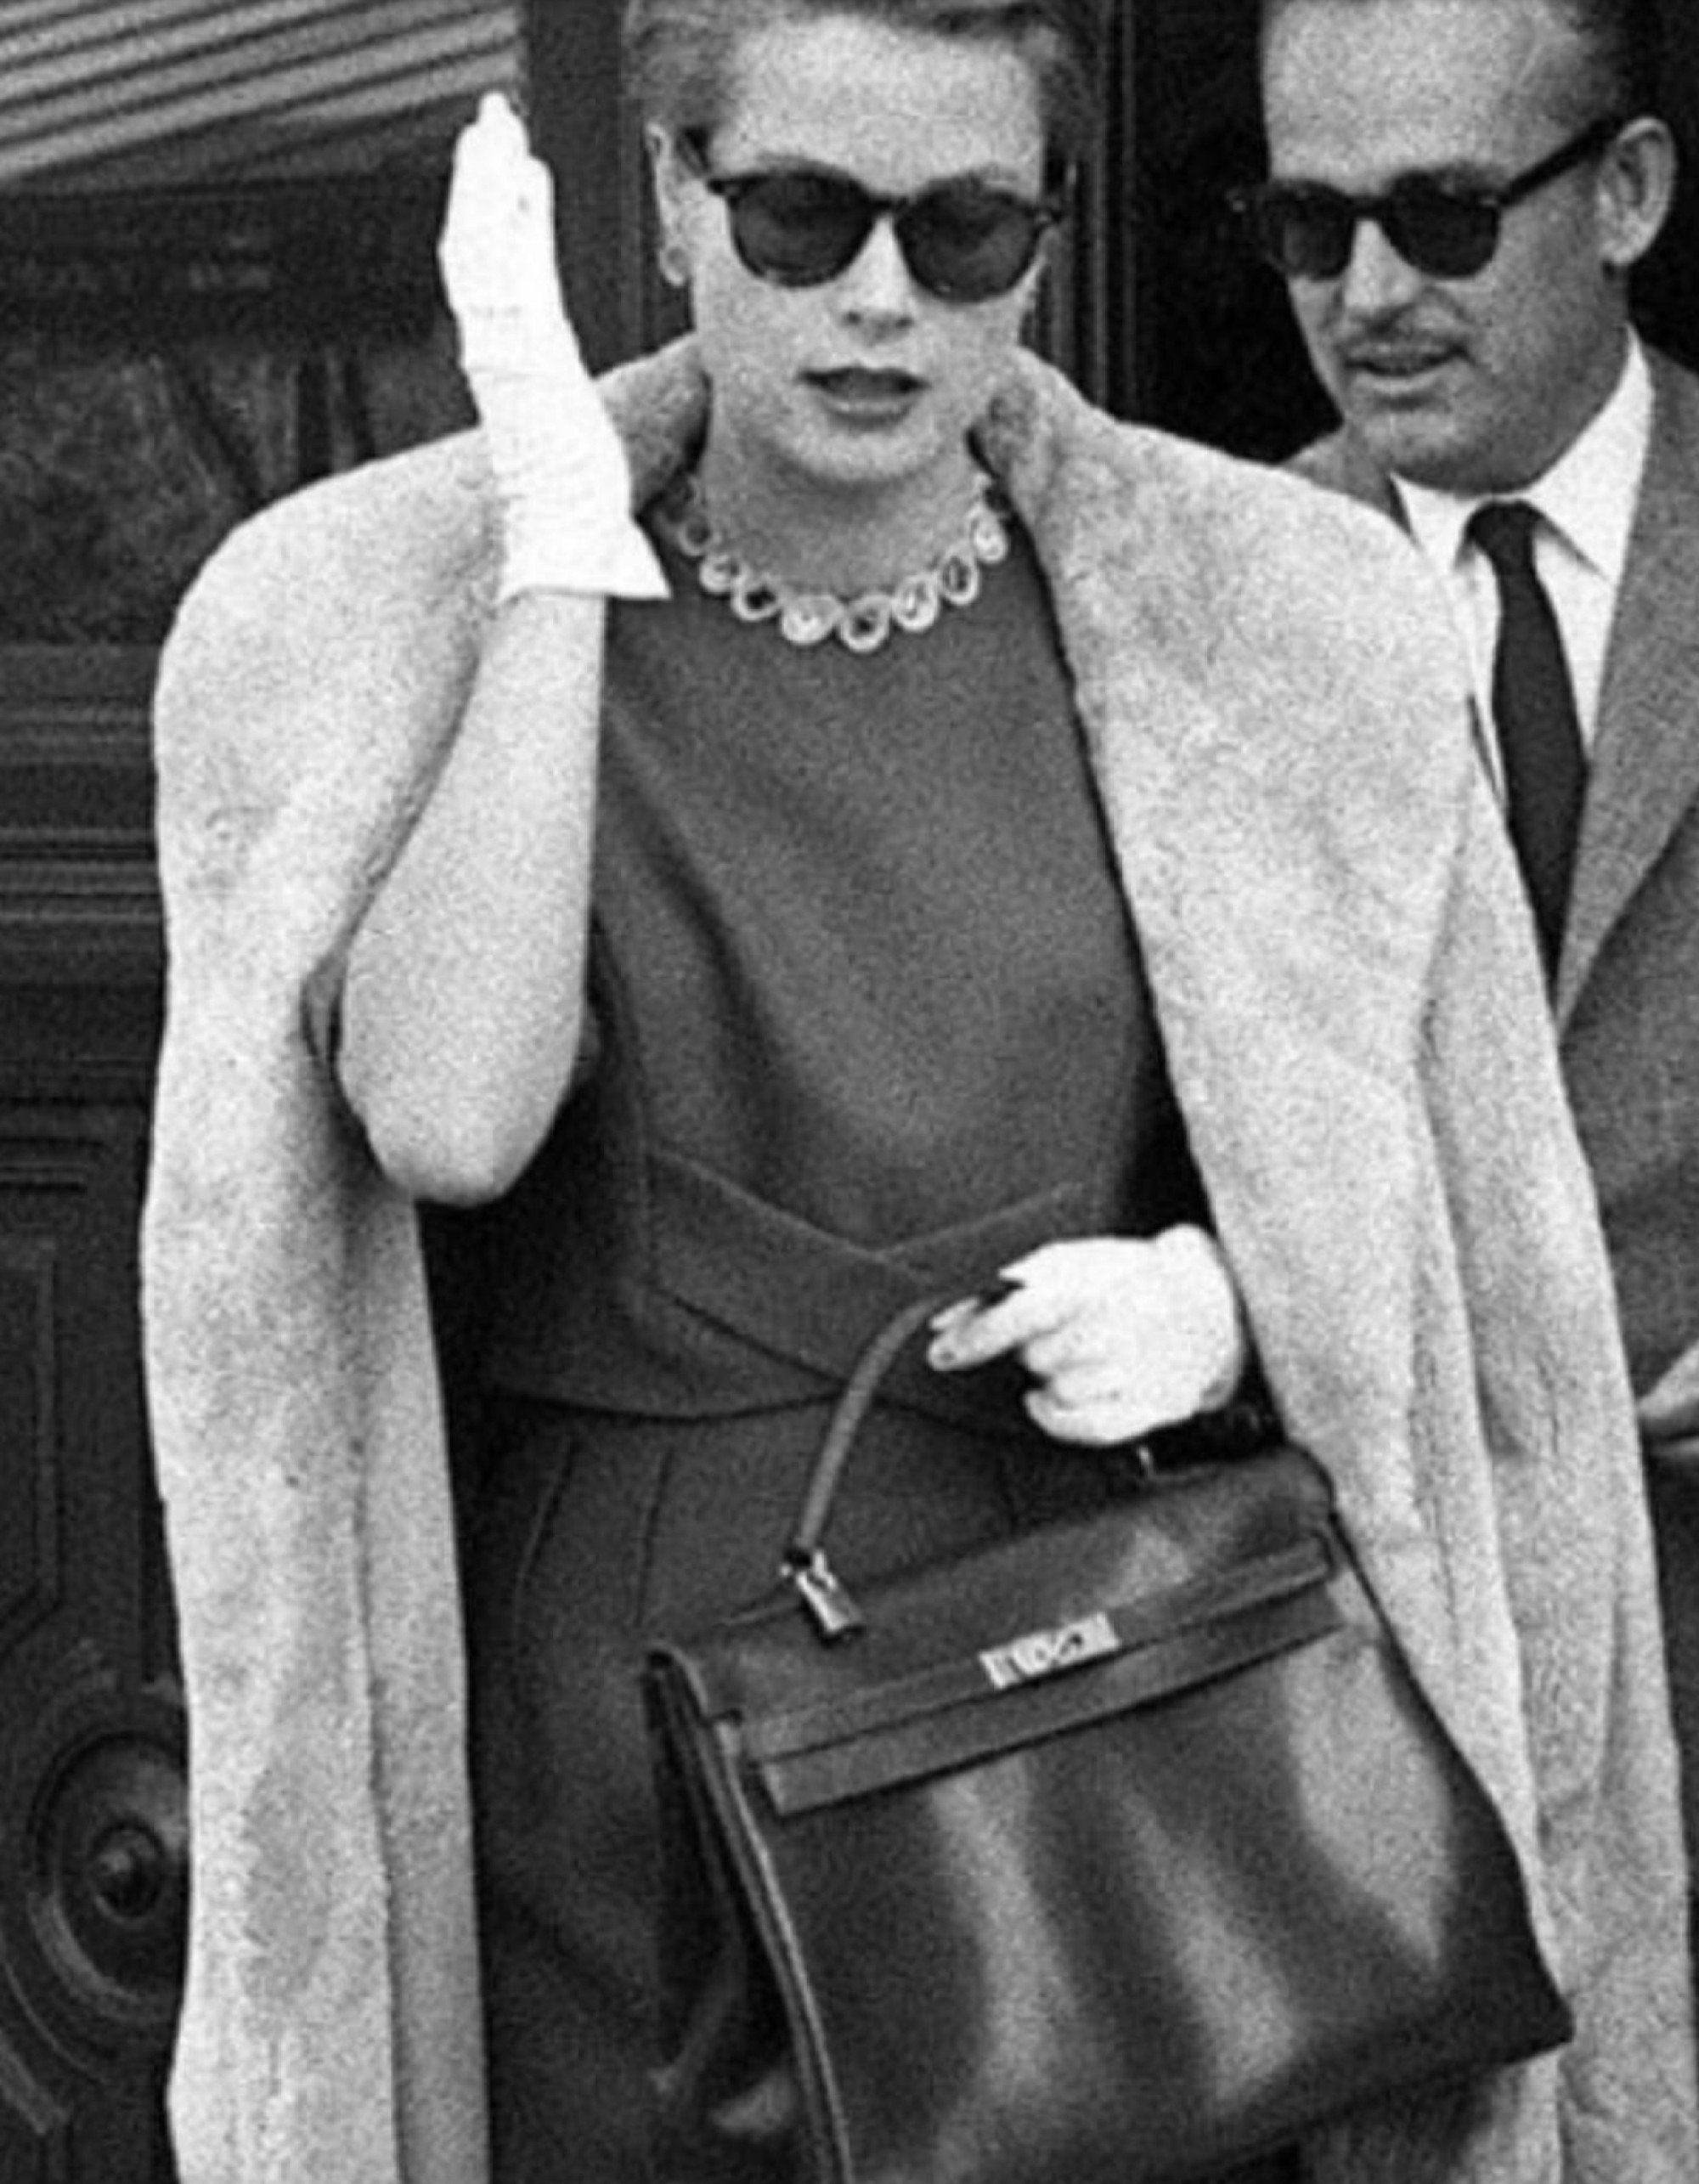 5 Iconic Handbags and the Women Who Made Them Famous